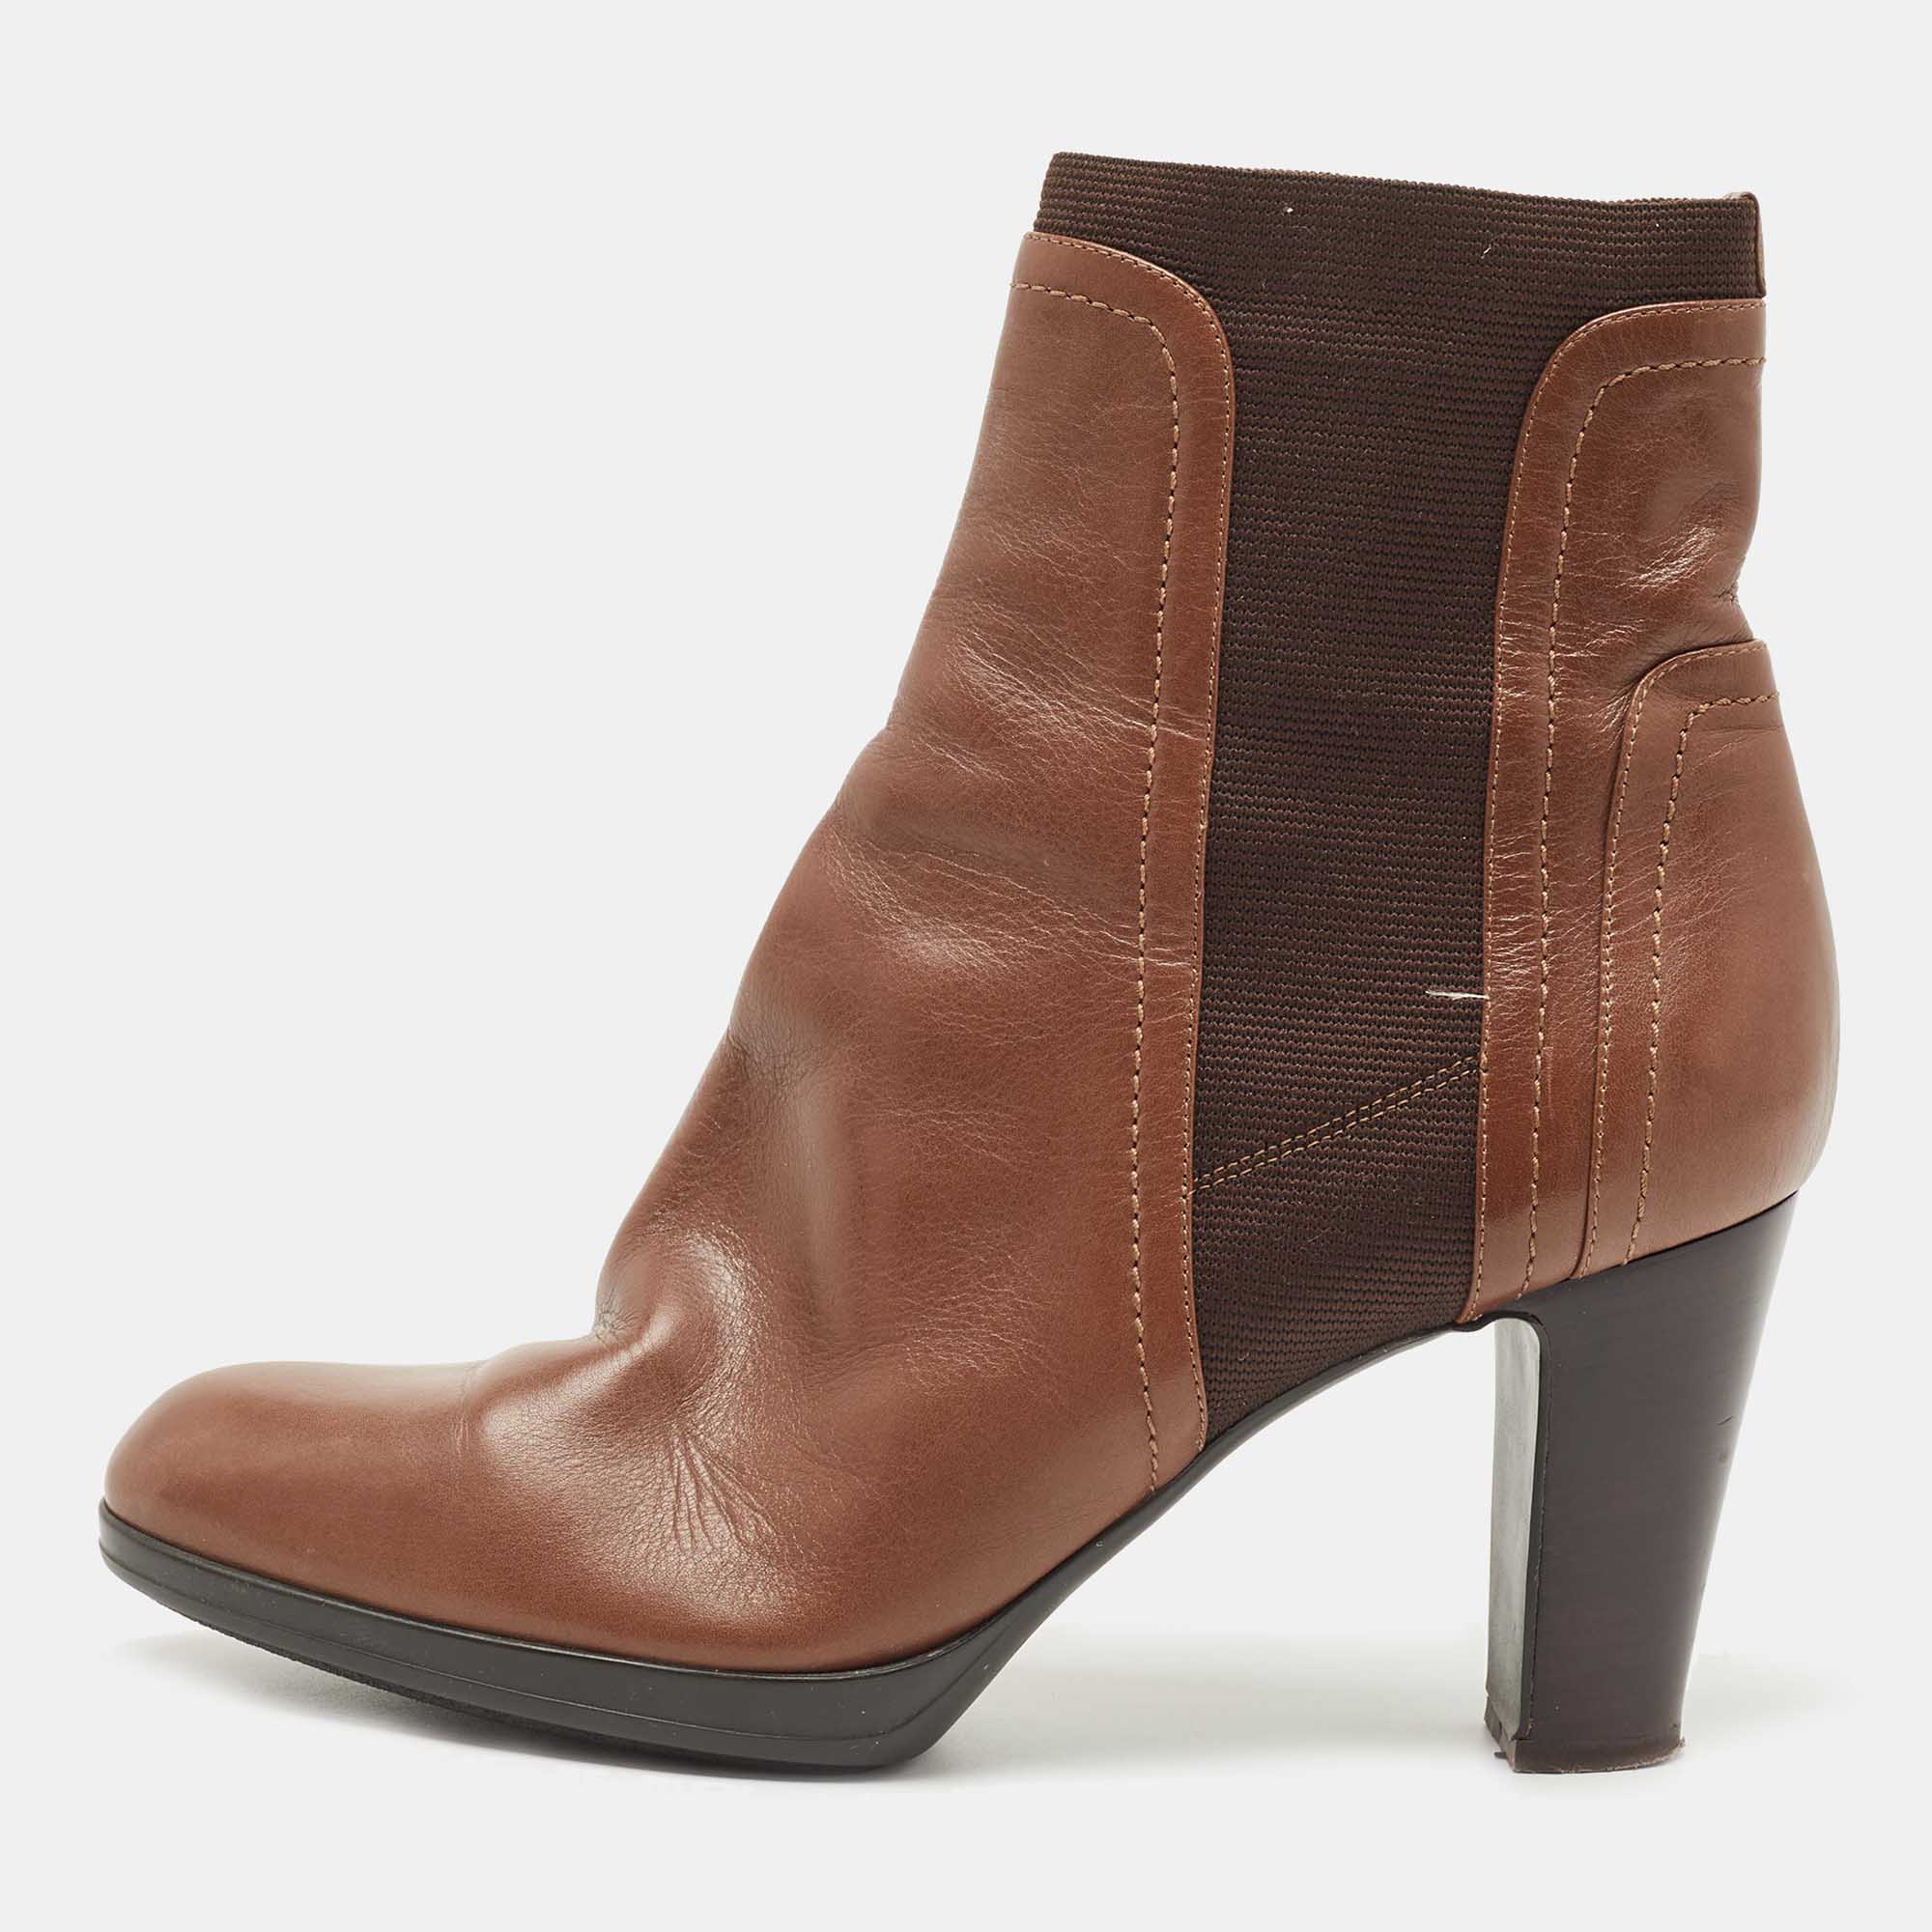 Sergio Rossi Brown Leather And Knit Fabric Ankle Boots Size 39